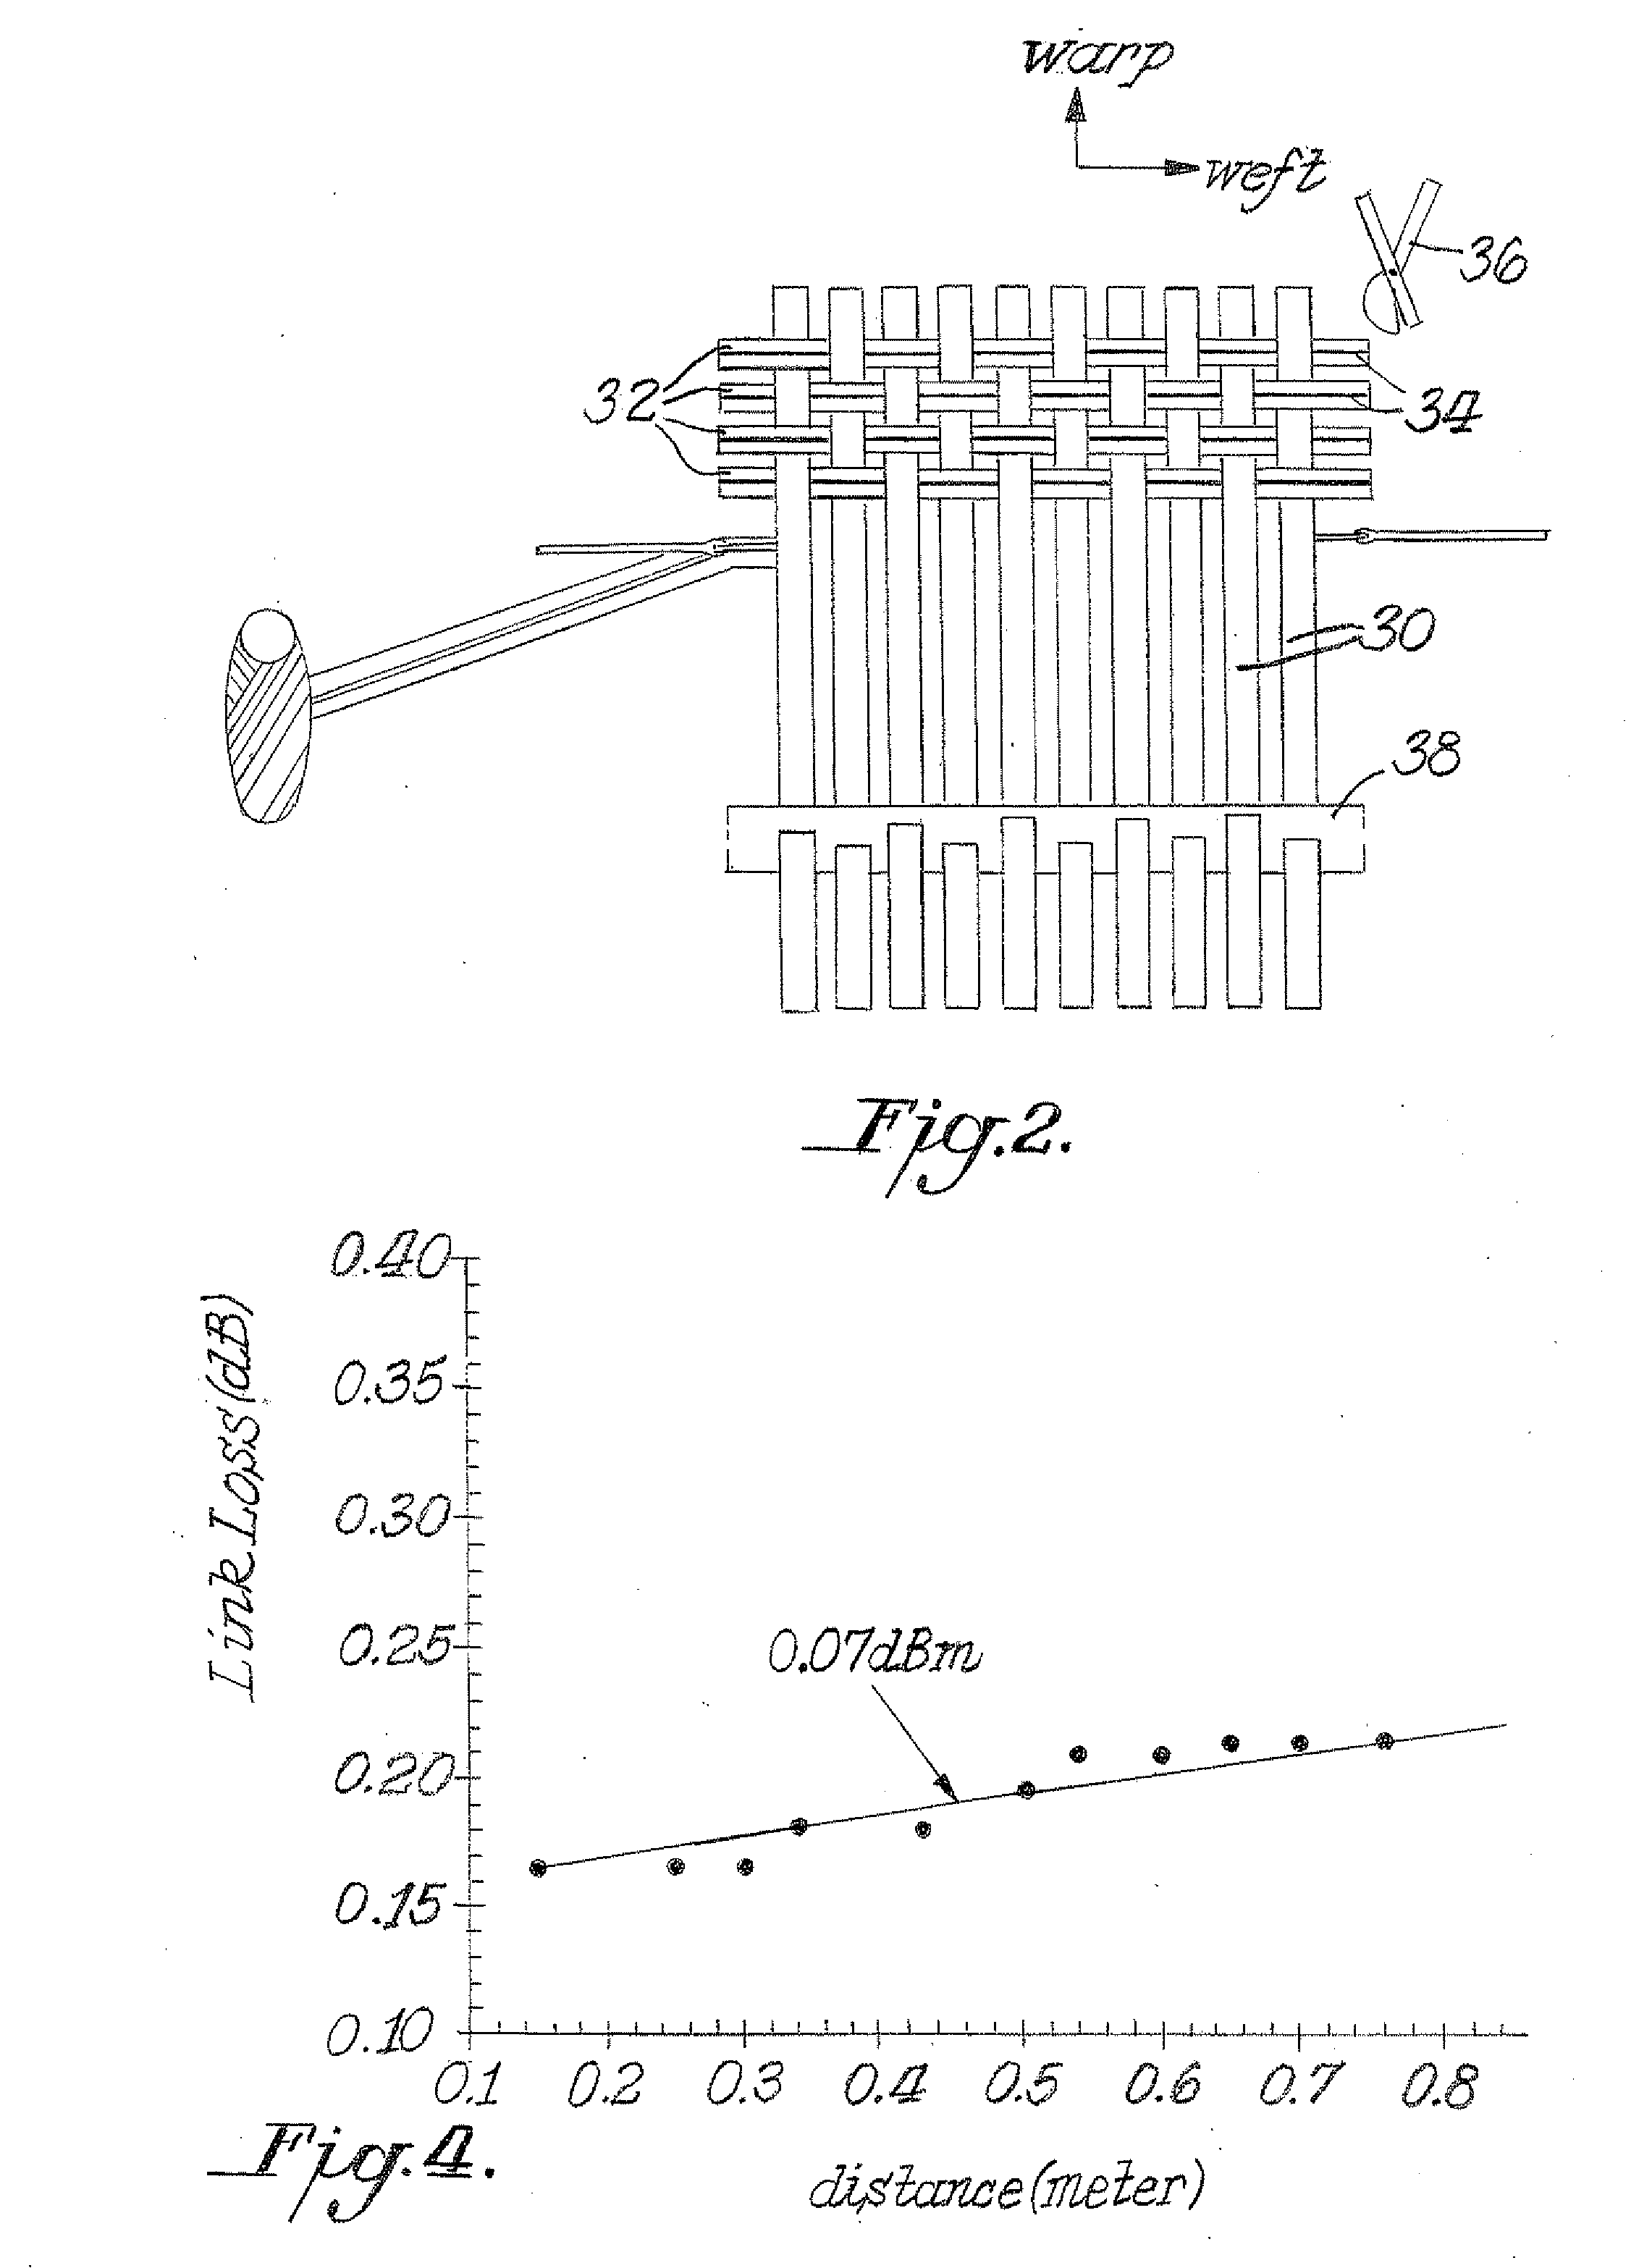 Automated process for embedding optical fibers in woven composites